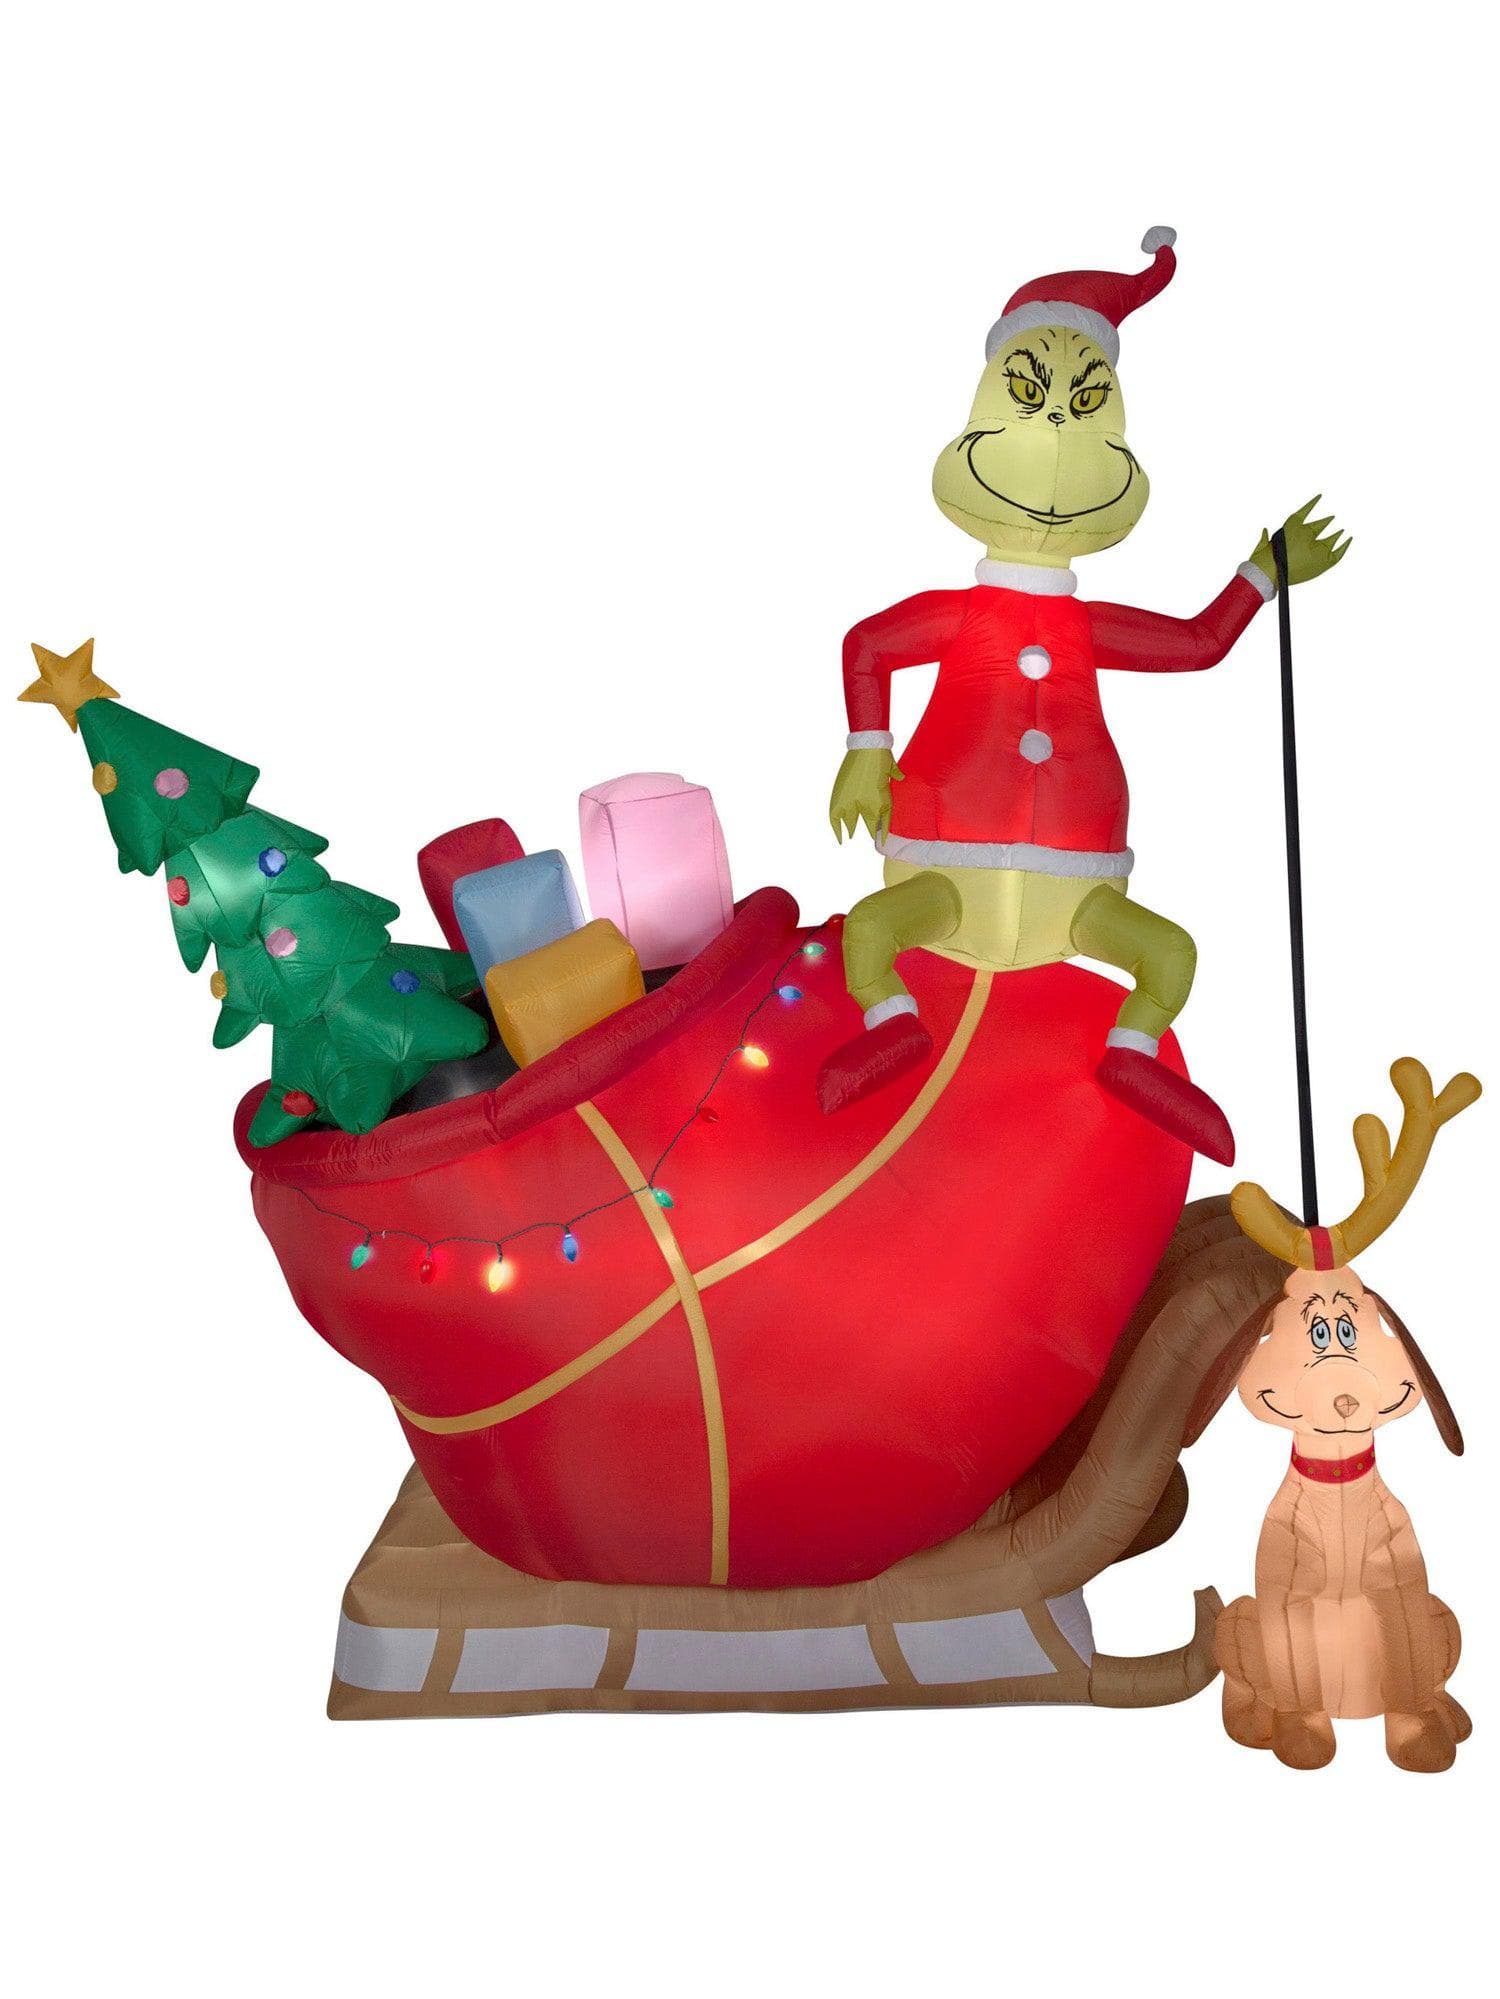 10 Foot Dr. Seuss The Grinch Sleigh Scene Light Up Christmas Inflatable Lawn Decor - costumes.com